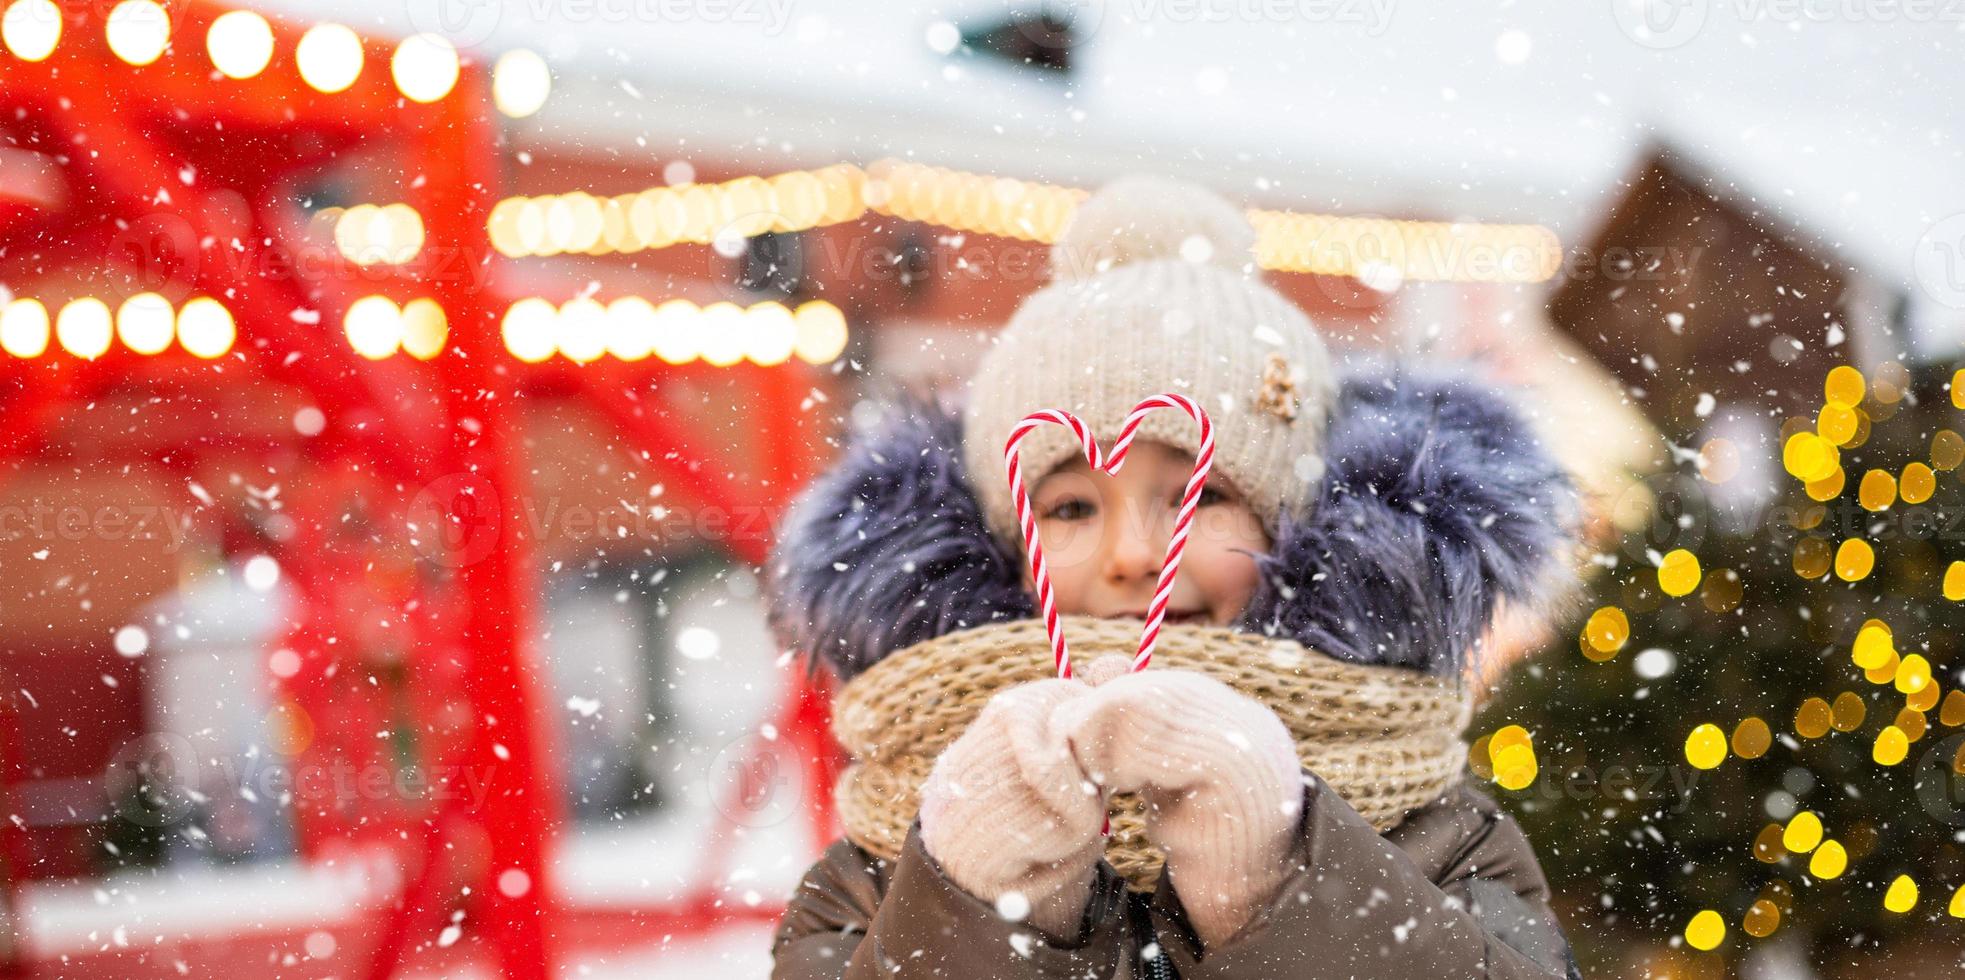 Pretty girl holds in his hands candy cane in the shape of a heart outdoor in warm clothes in winter festive market. Fairy lights garlands decorated snow town for new year. Christmas mood photo